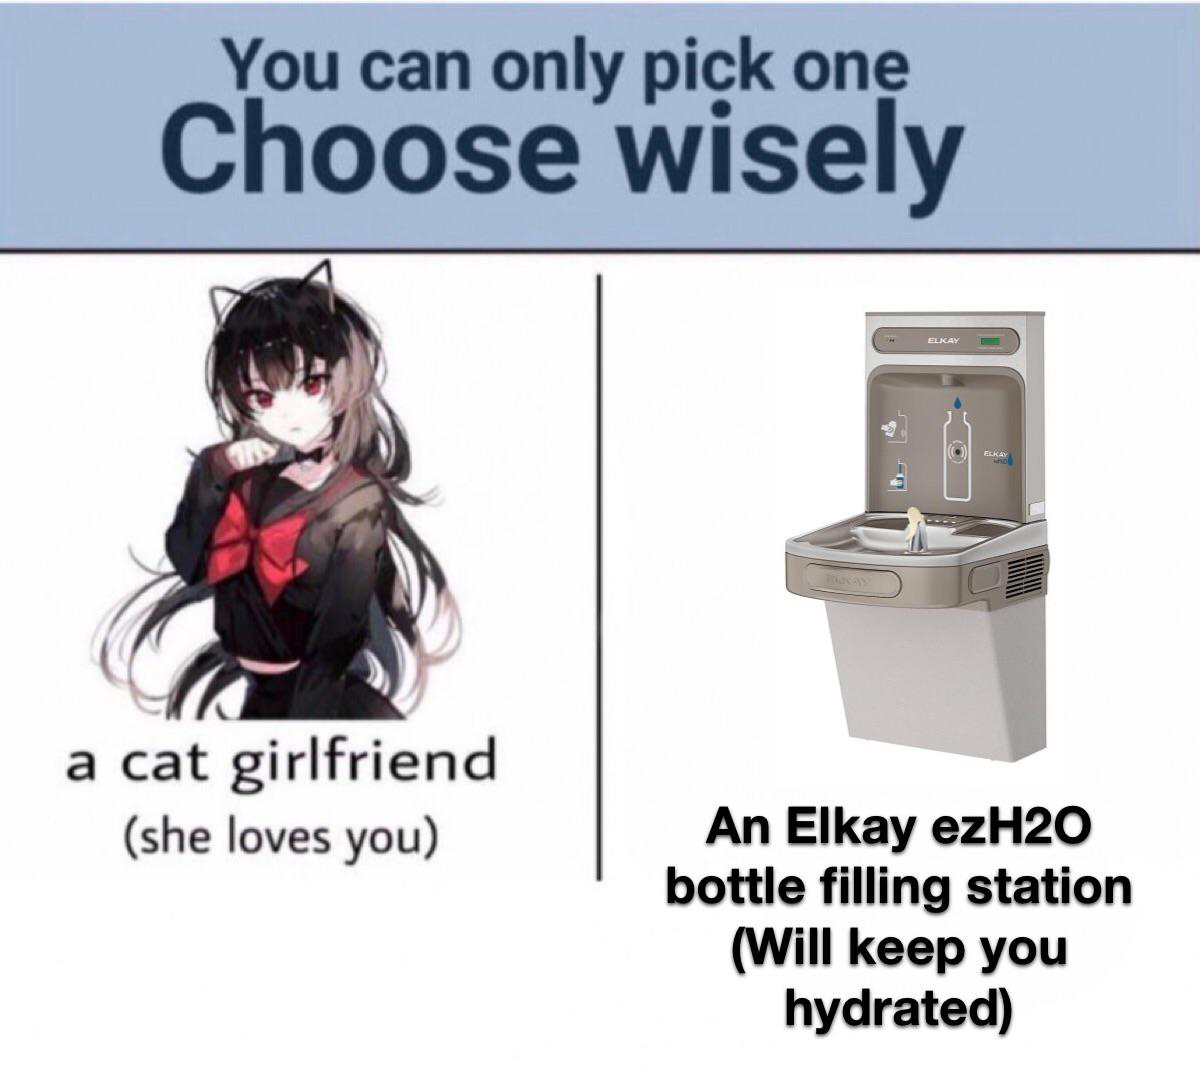 funniest memes - choose wisely cat girlfriend meme - You can only pick one Choose wisely Elkay a cat girlfriend she loves you An Elkay ezH20 bottle filling station Will keep you hydrated